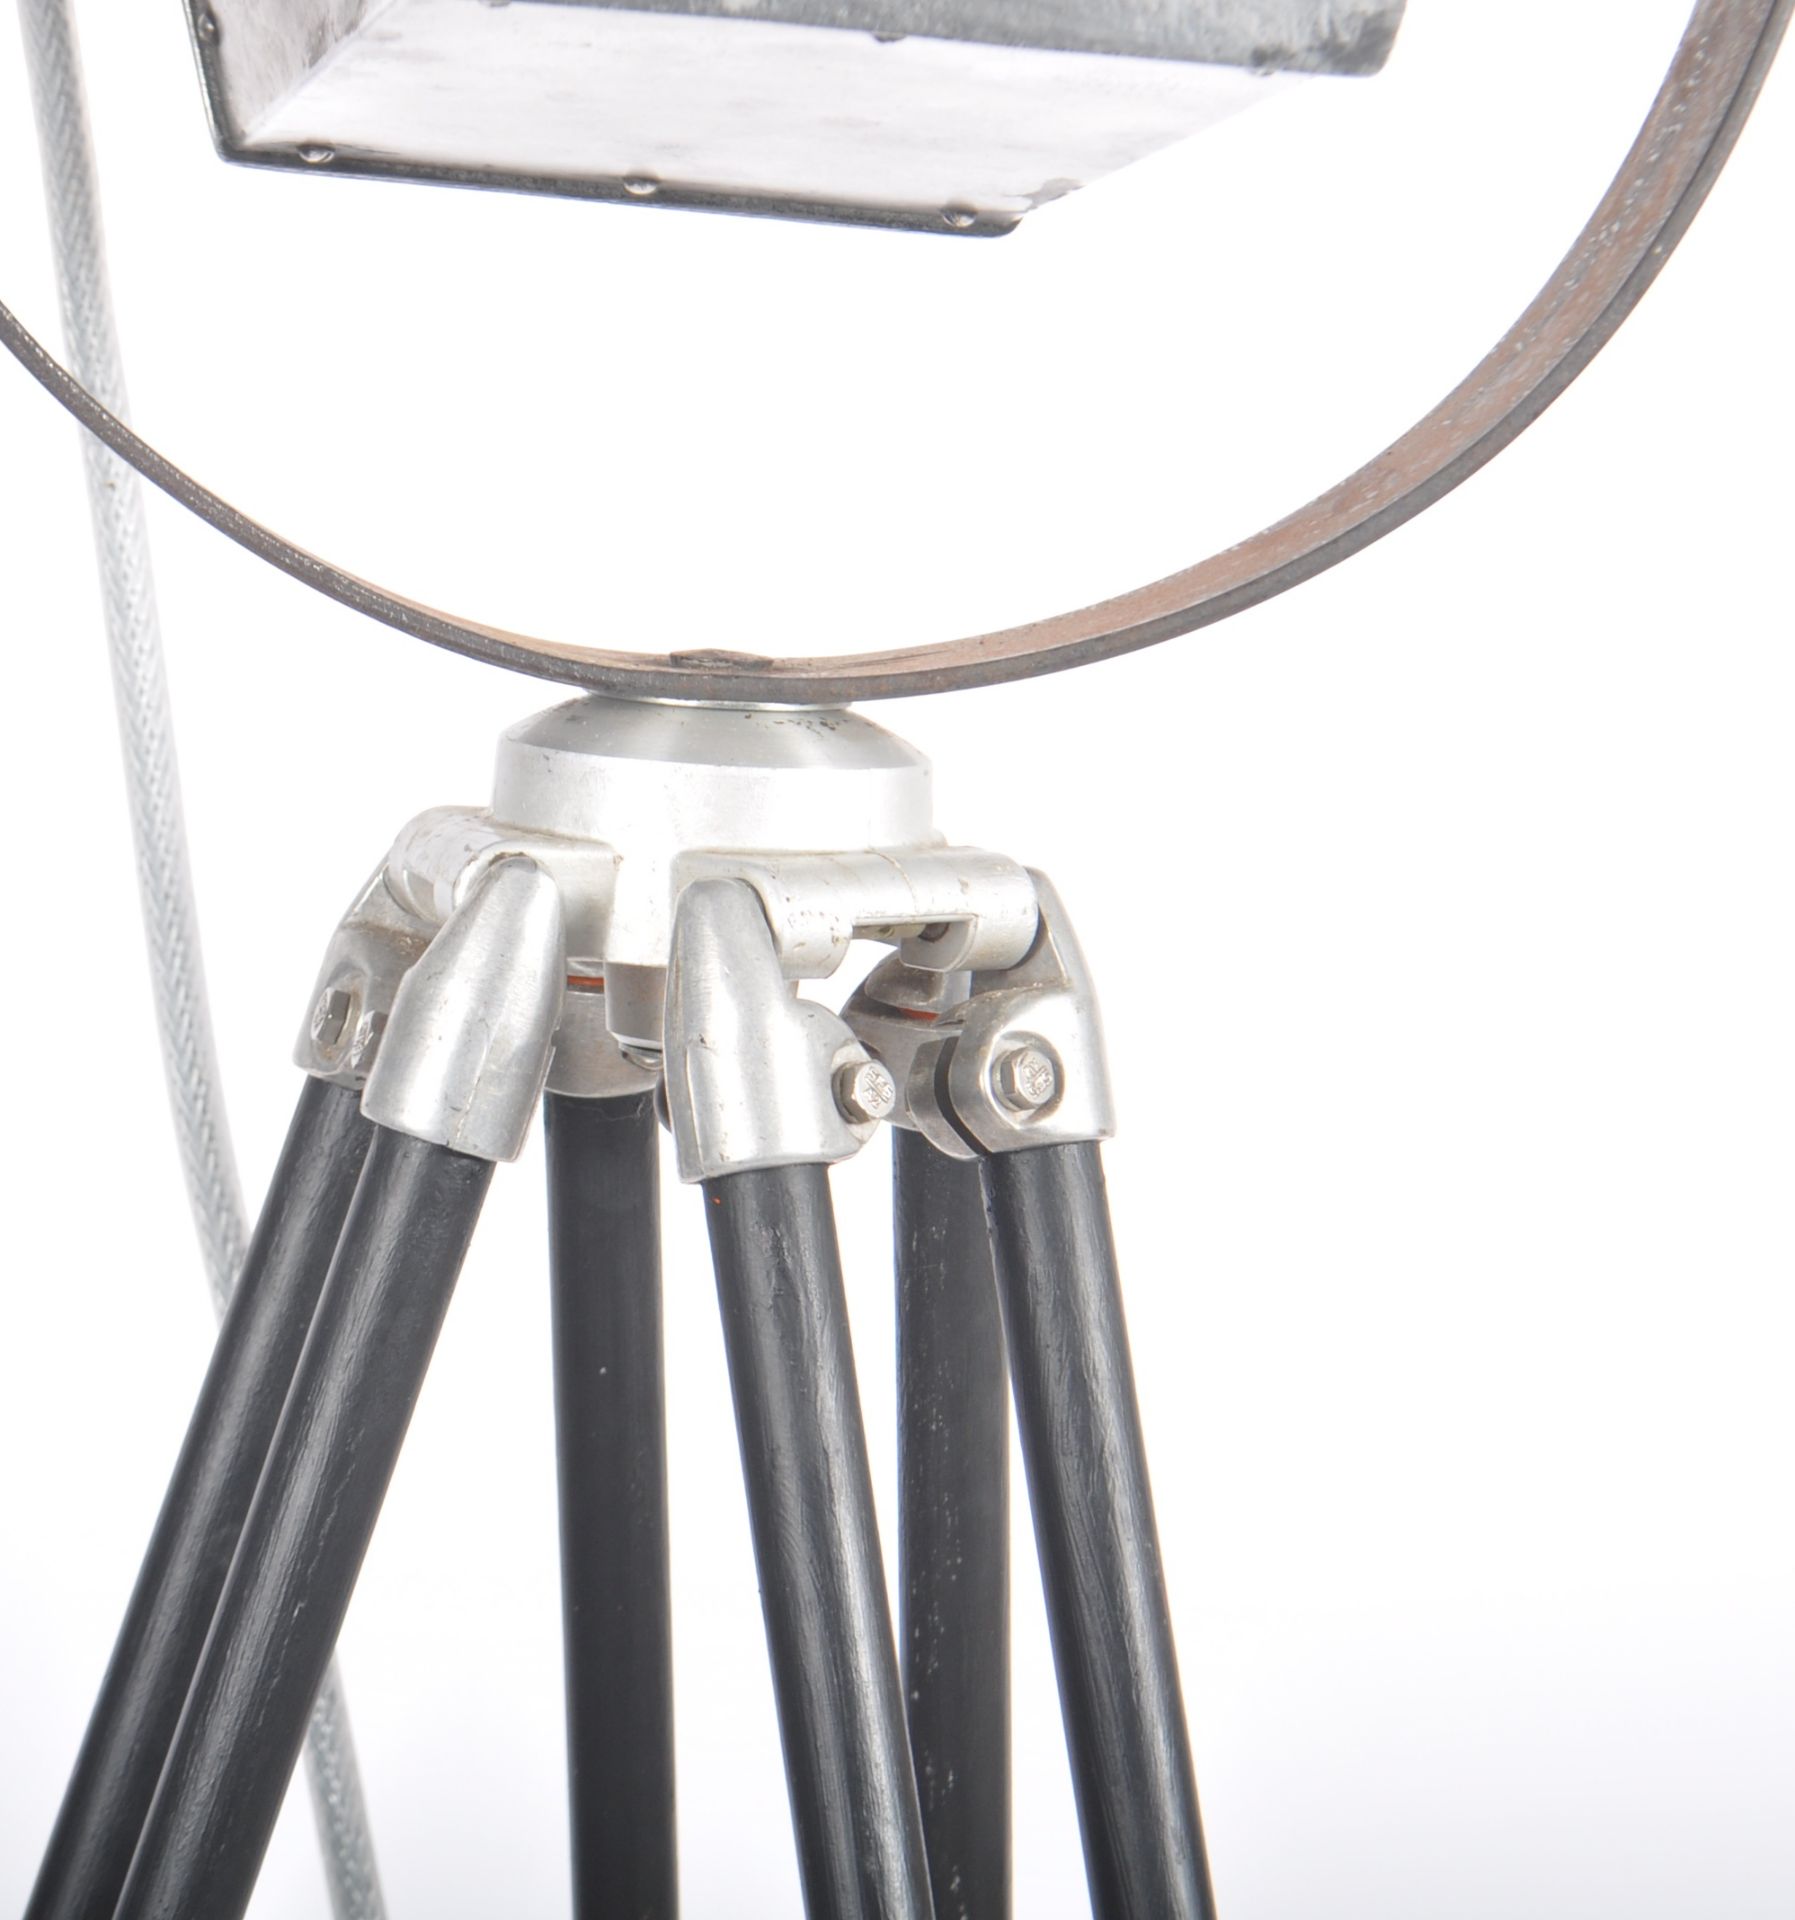 LARGE CONTEMPORARY SPOTLIGHT LAMP ON TRIPOD STAND - Image 3 of 10